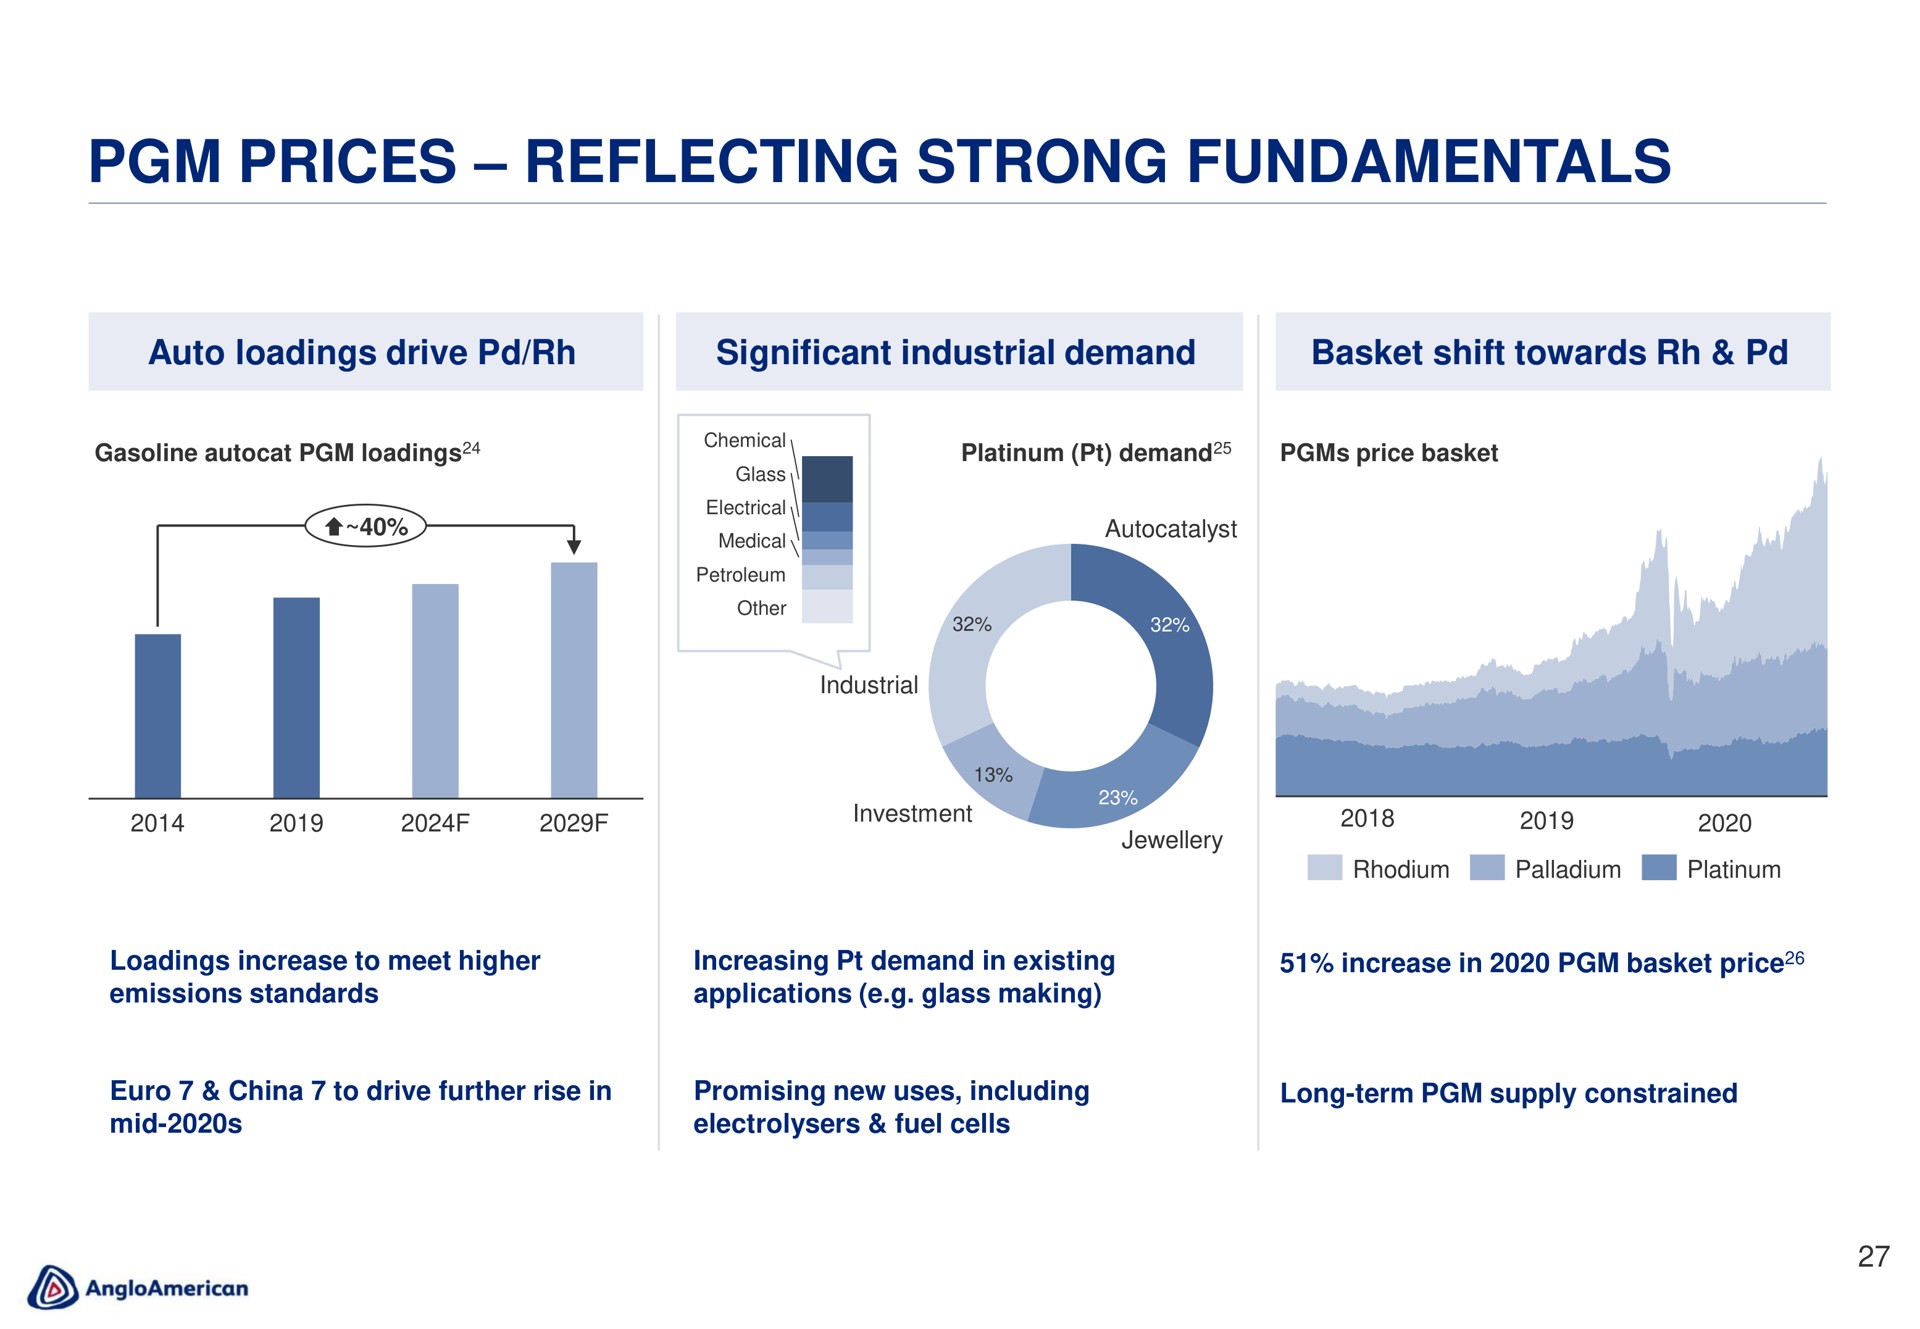 prices reflecting strong fundamentals | AngloAmerican